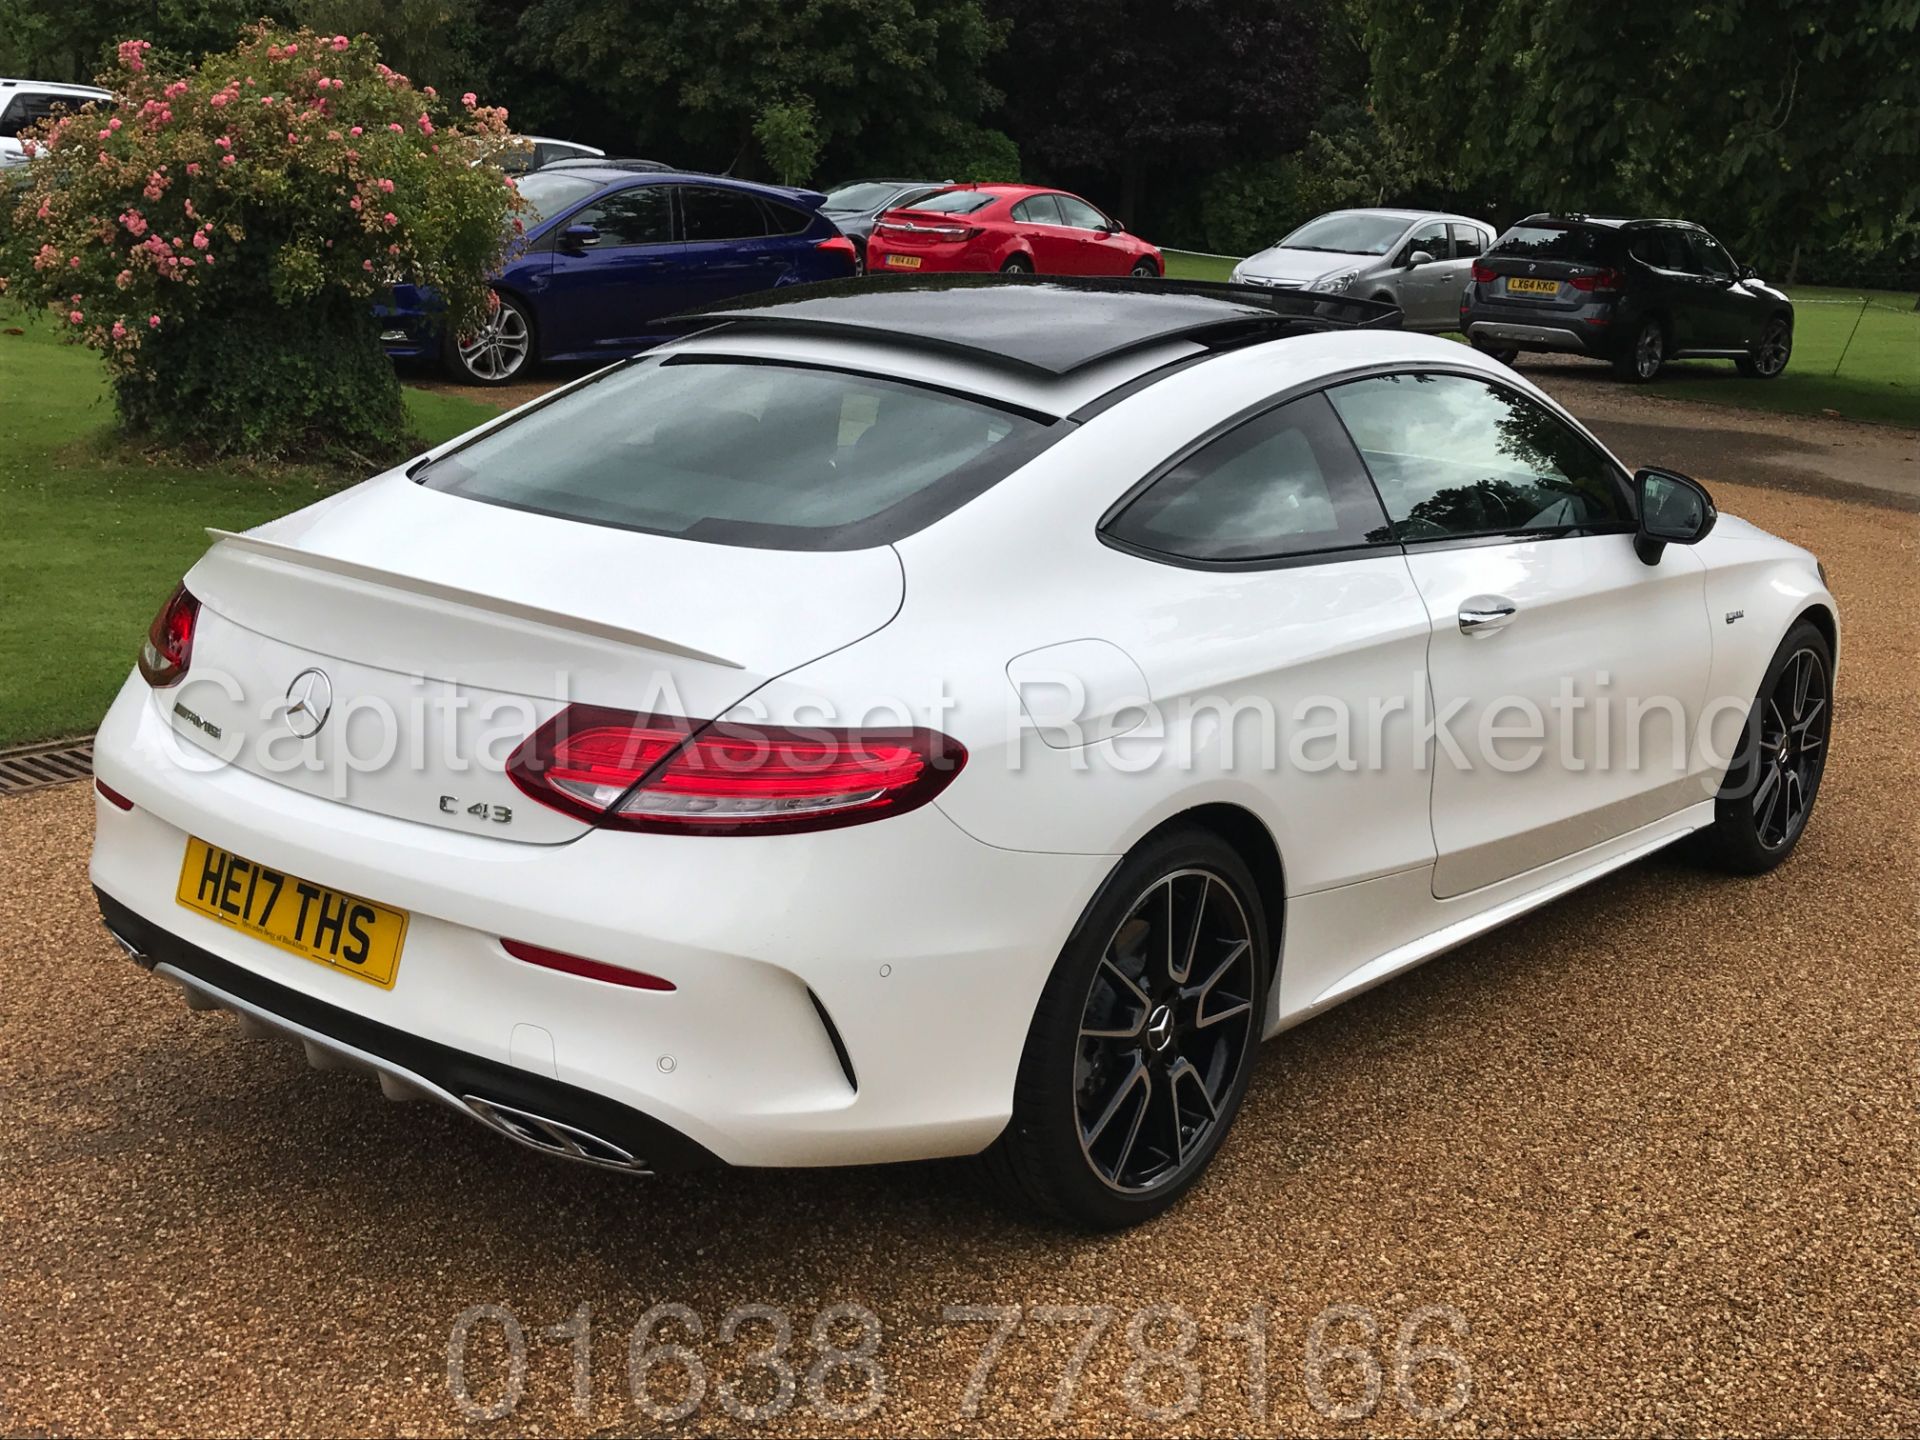 MEREDES-BENZ C43 AMG PREMIUM '4 MATIC' COUPE (2017) '9-G AUTO - LEATHER - SAT NAV' **FULLY LOADED** - Image 15 of 57